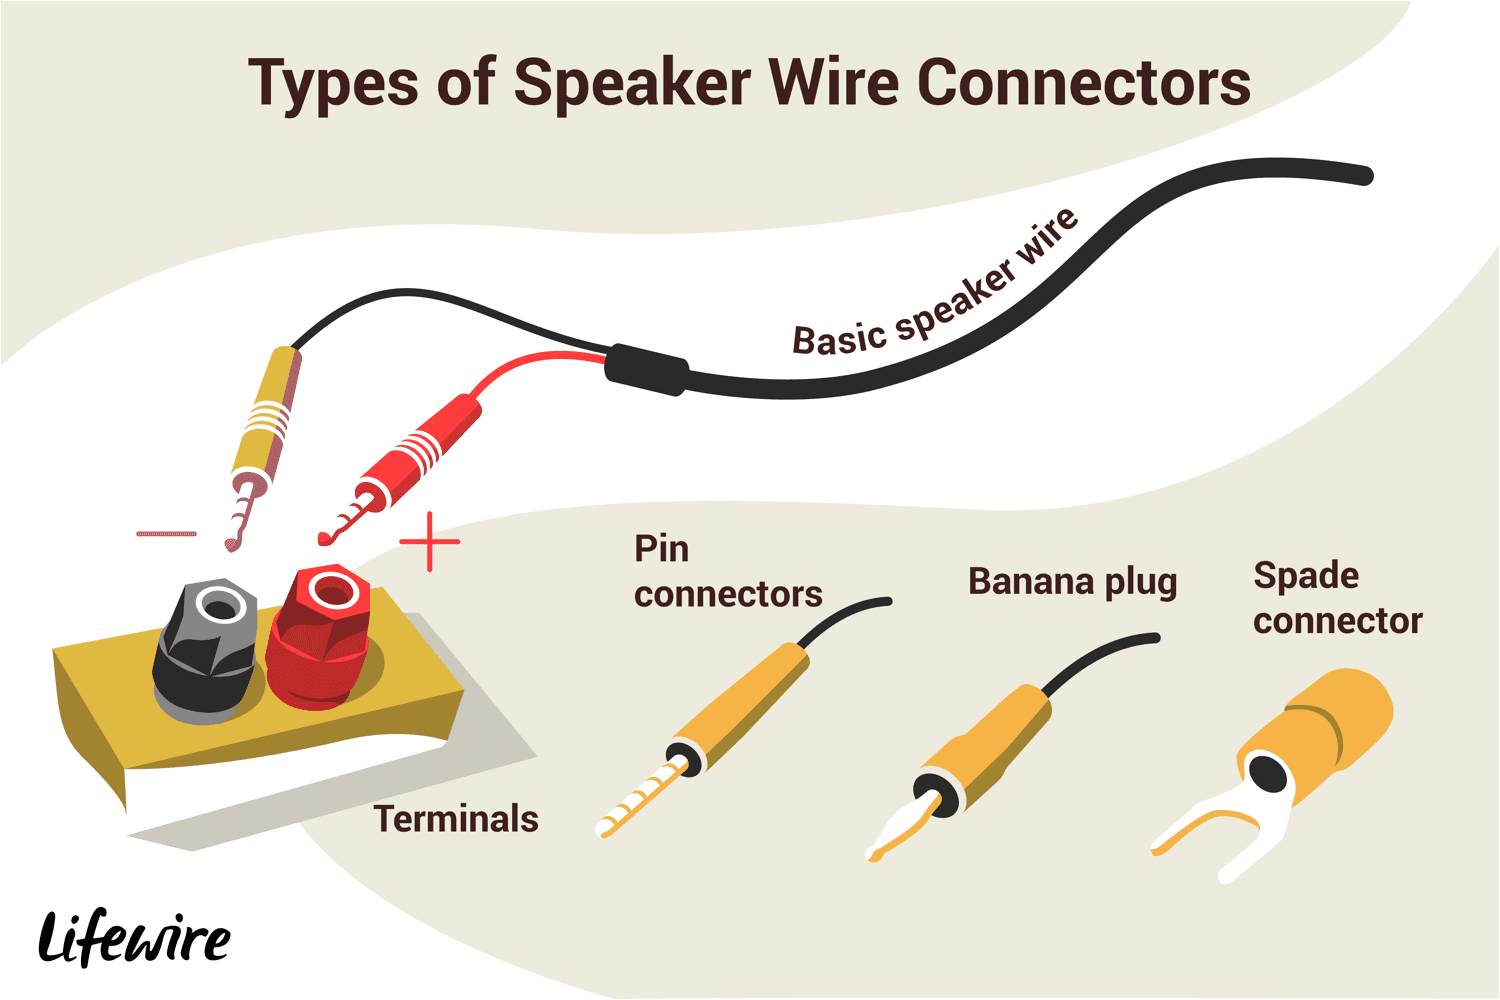 an illustration of the different types of speaker wire connectors